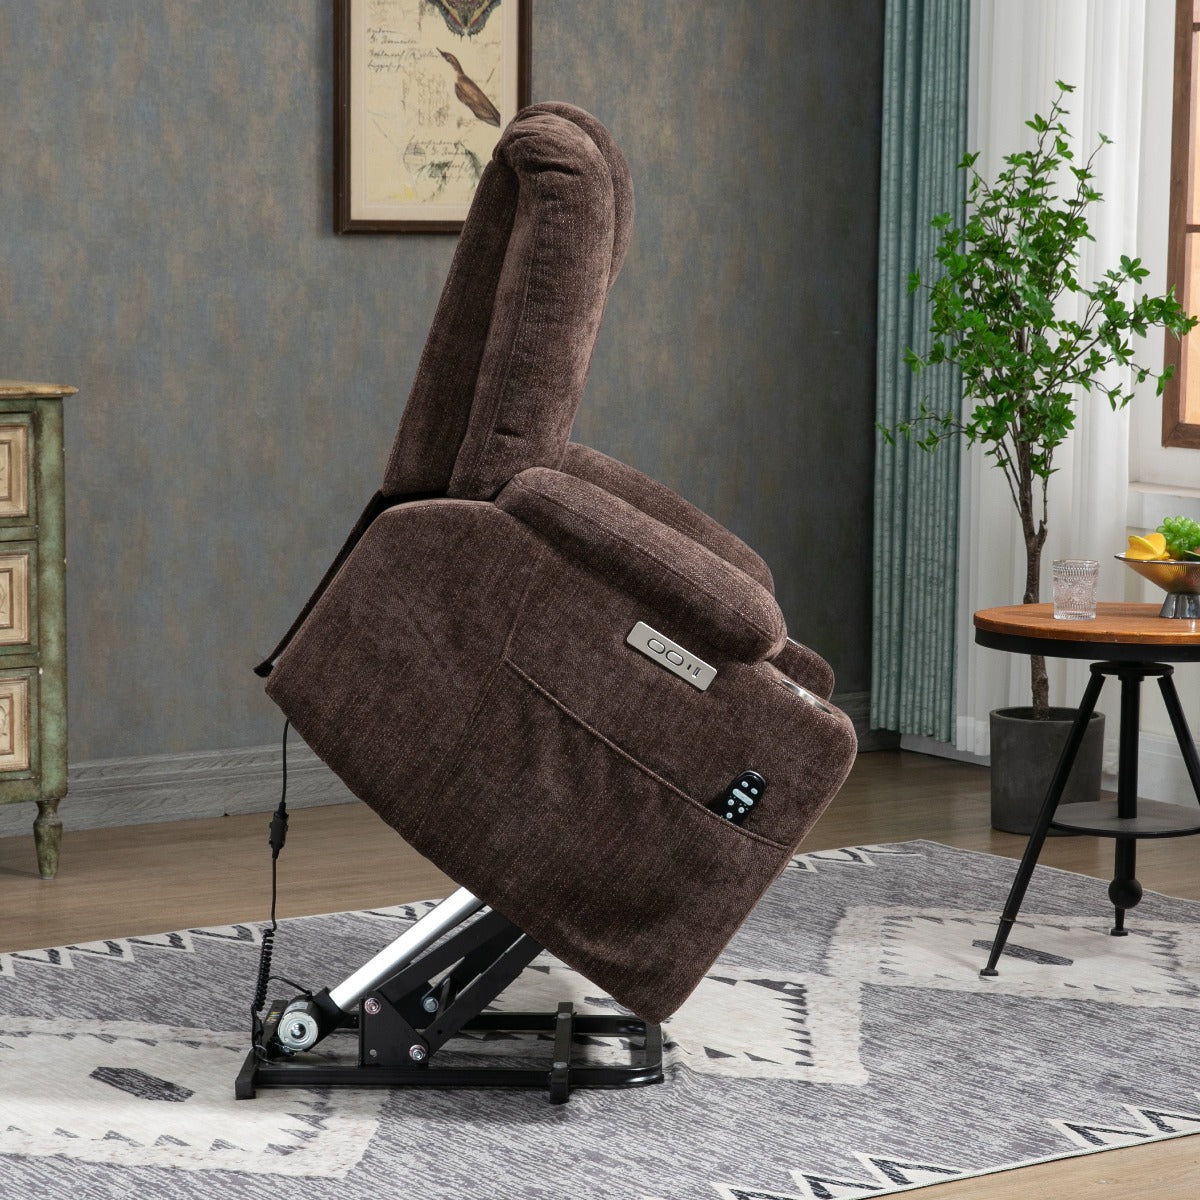 EMON's Power Lift Recliner, lifted side view - My Lift Chair